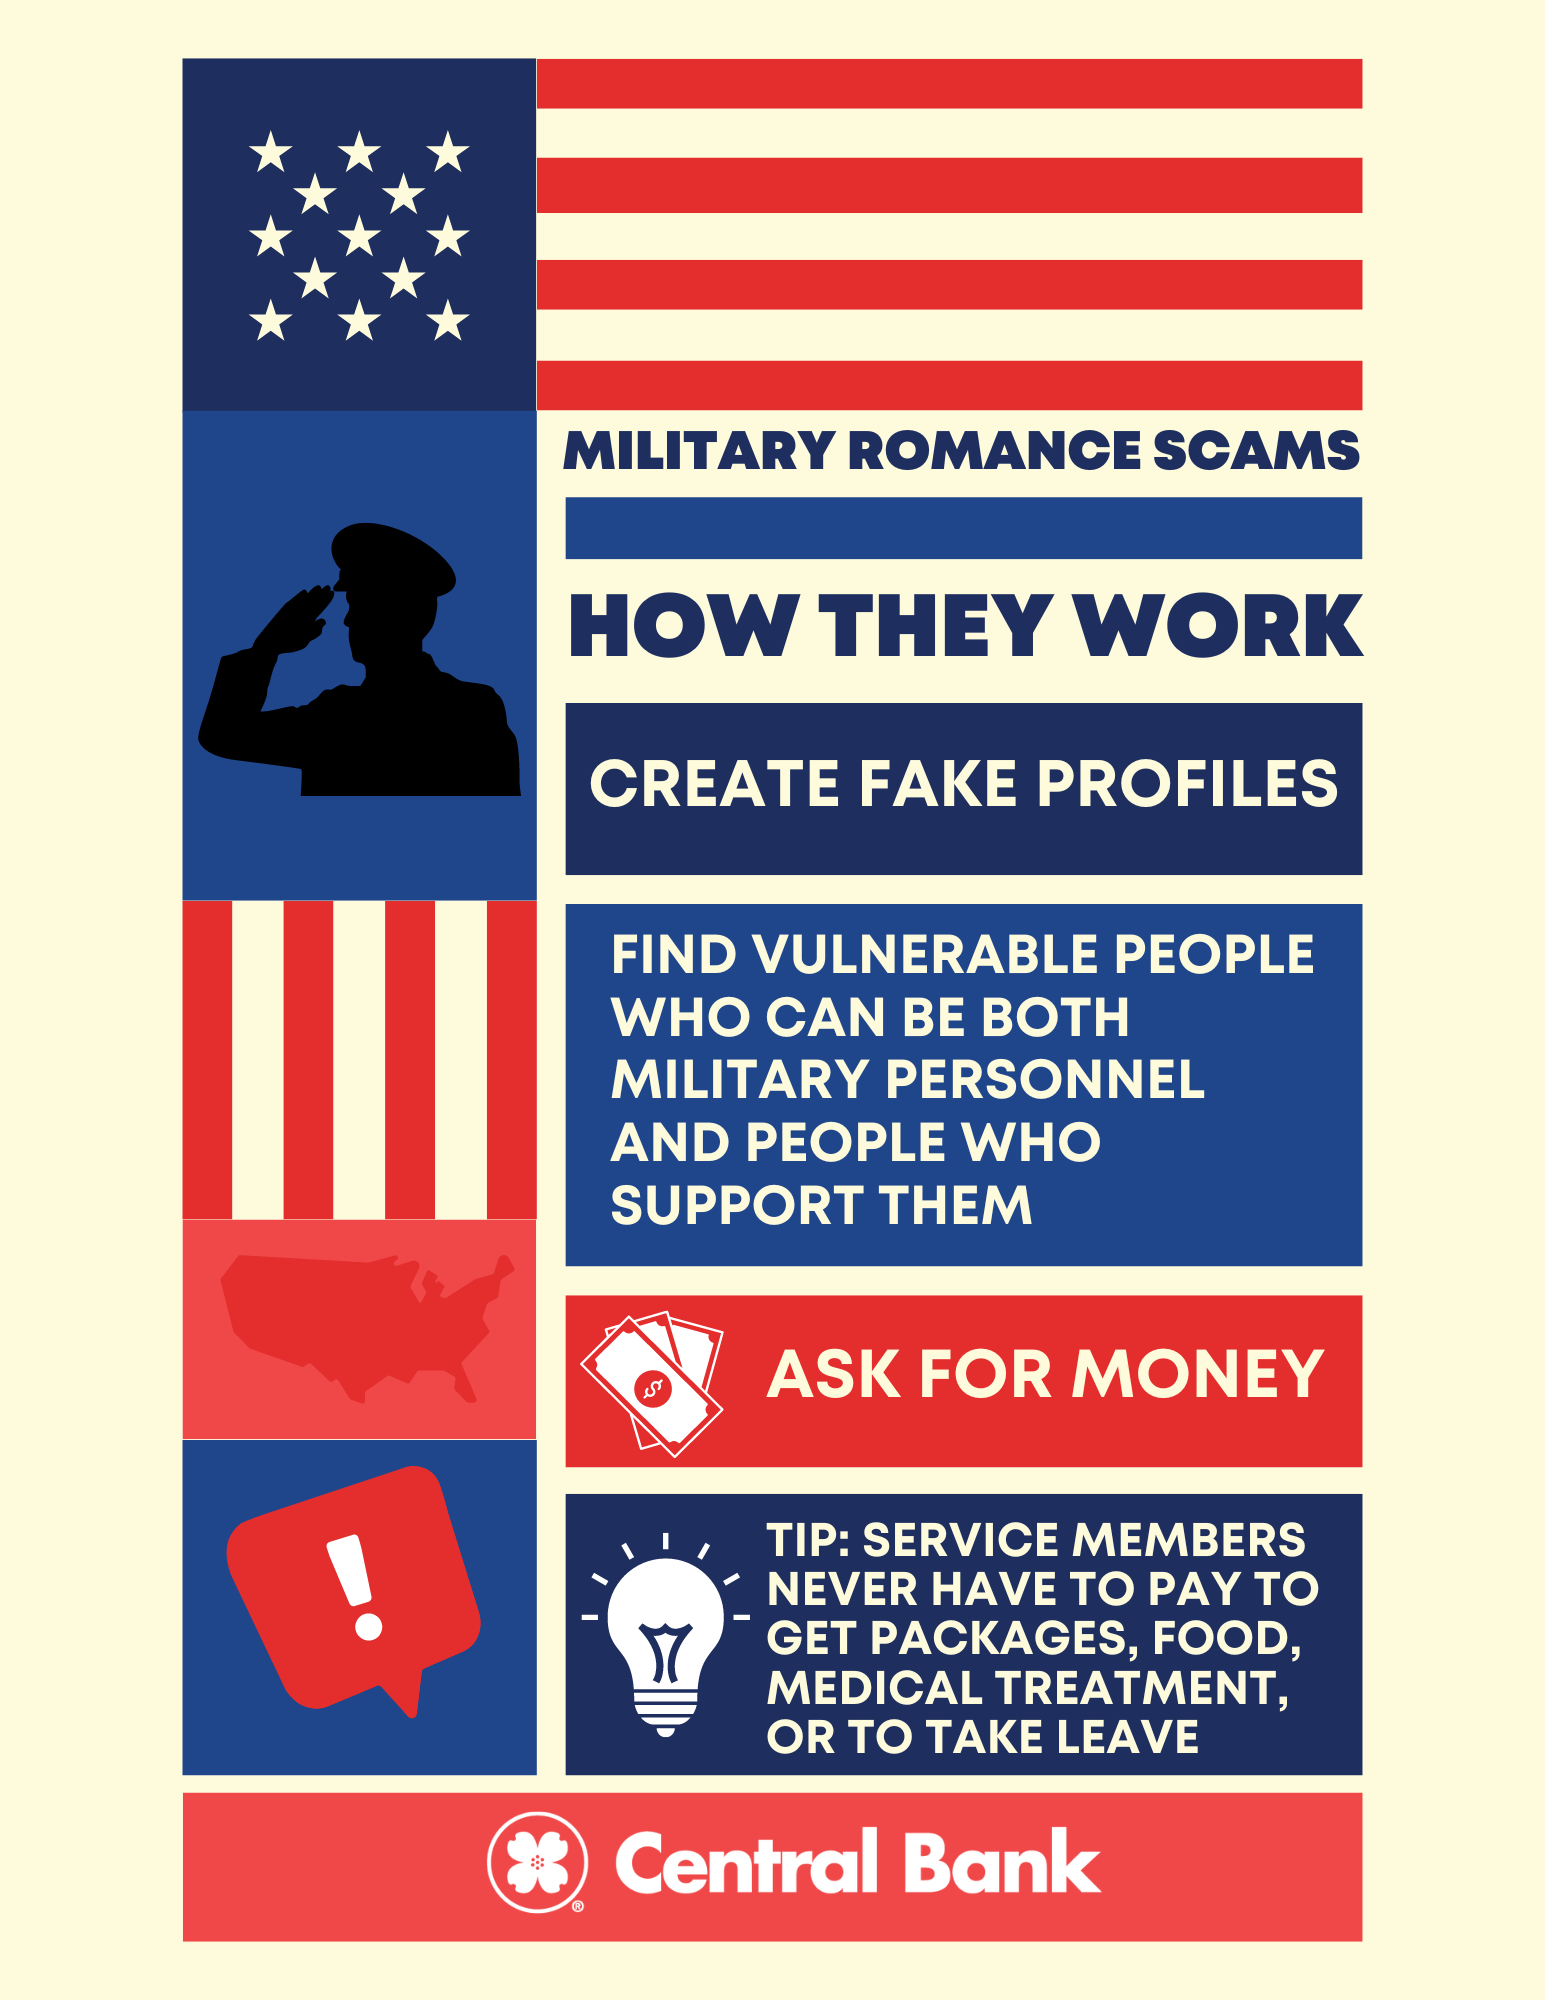 Military romance scams infographic